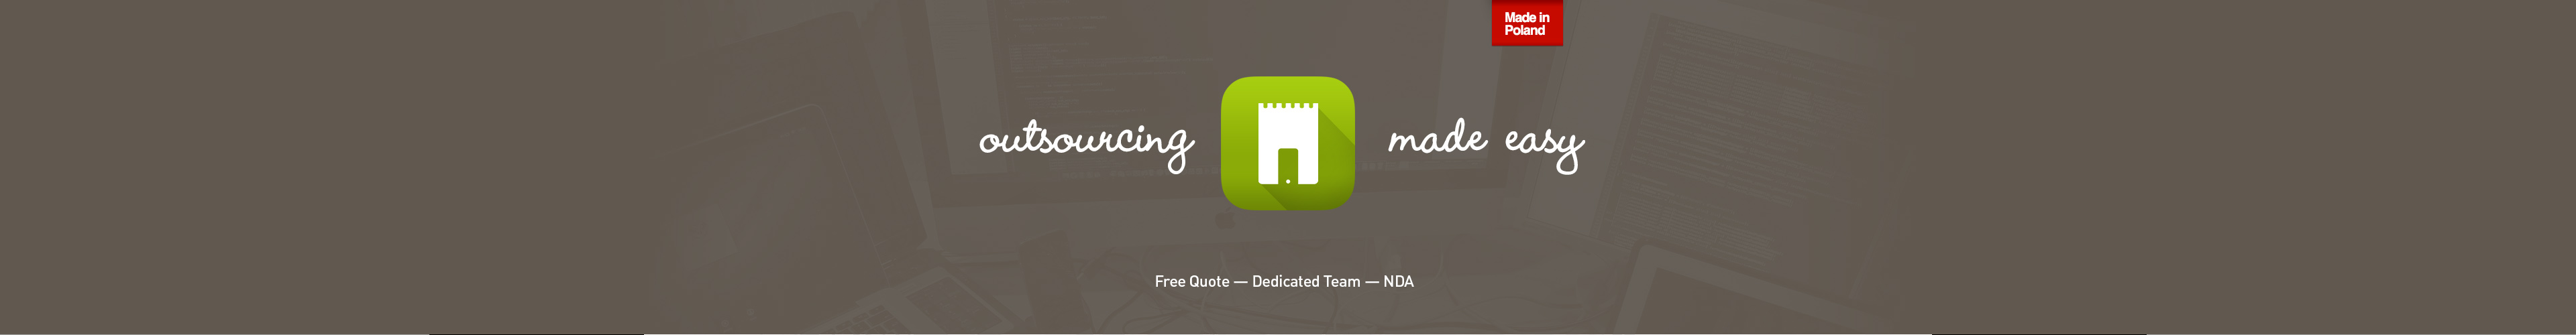 outsourcing made easy - NDA, Free Quote, Hourly or Fixed Rates, Dedicated Team, Agile, Git, SQA